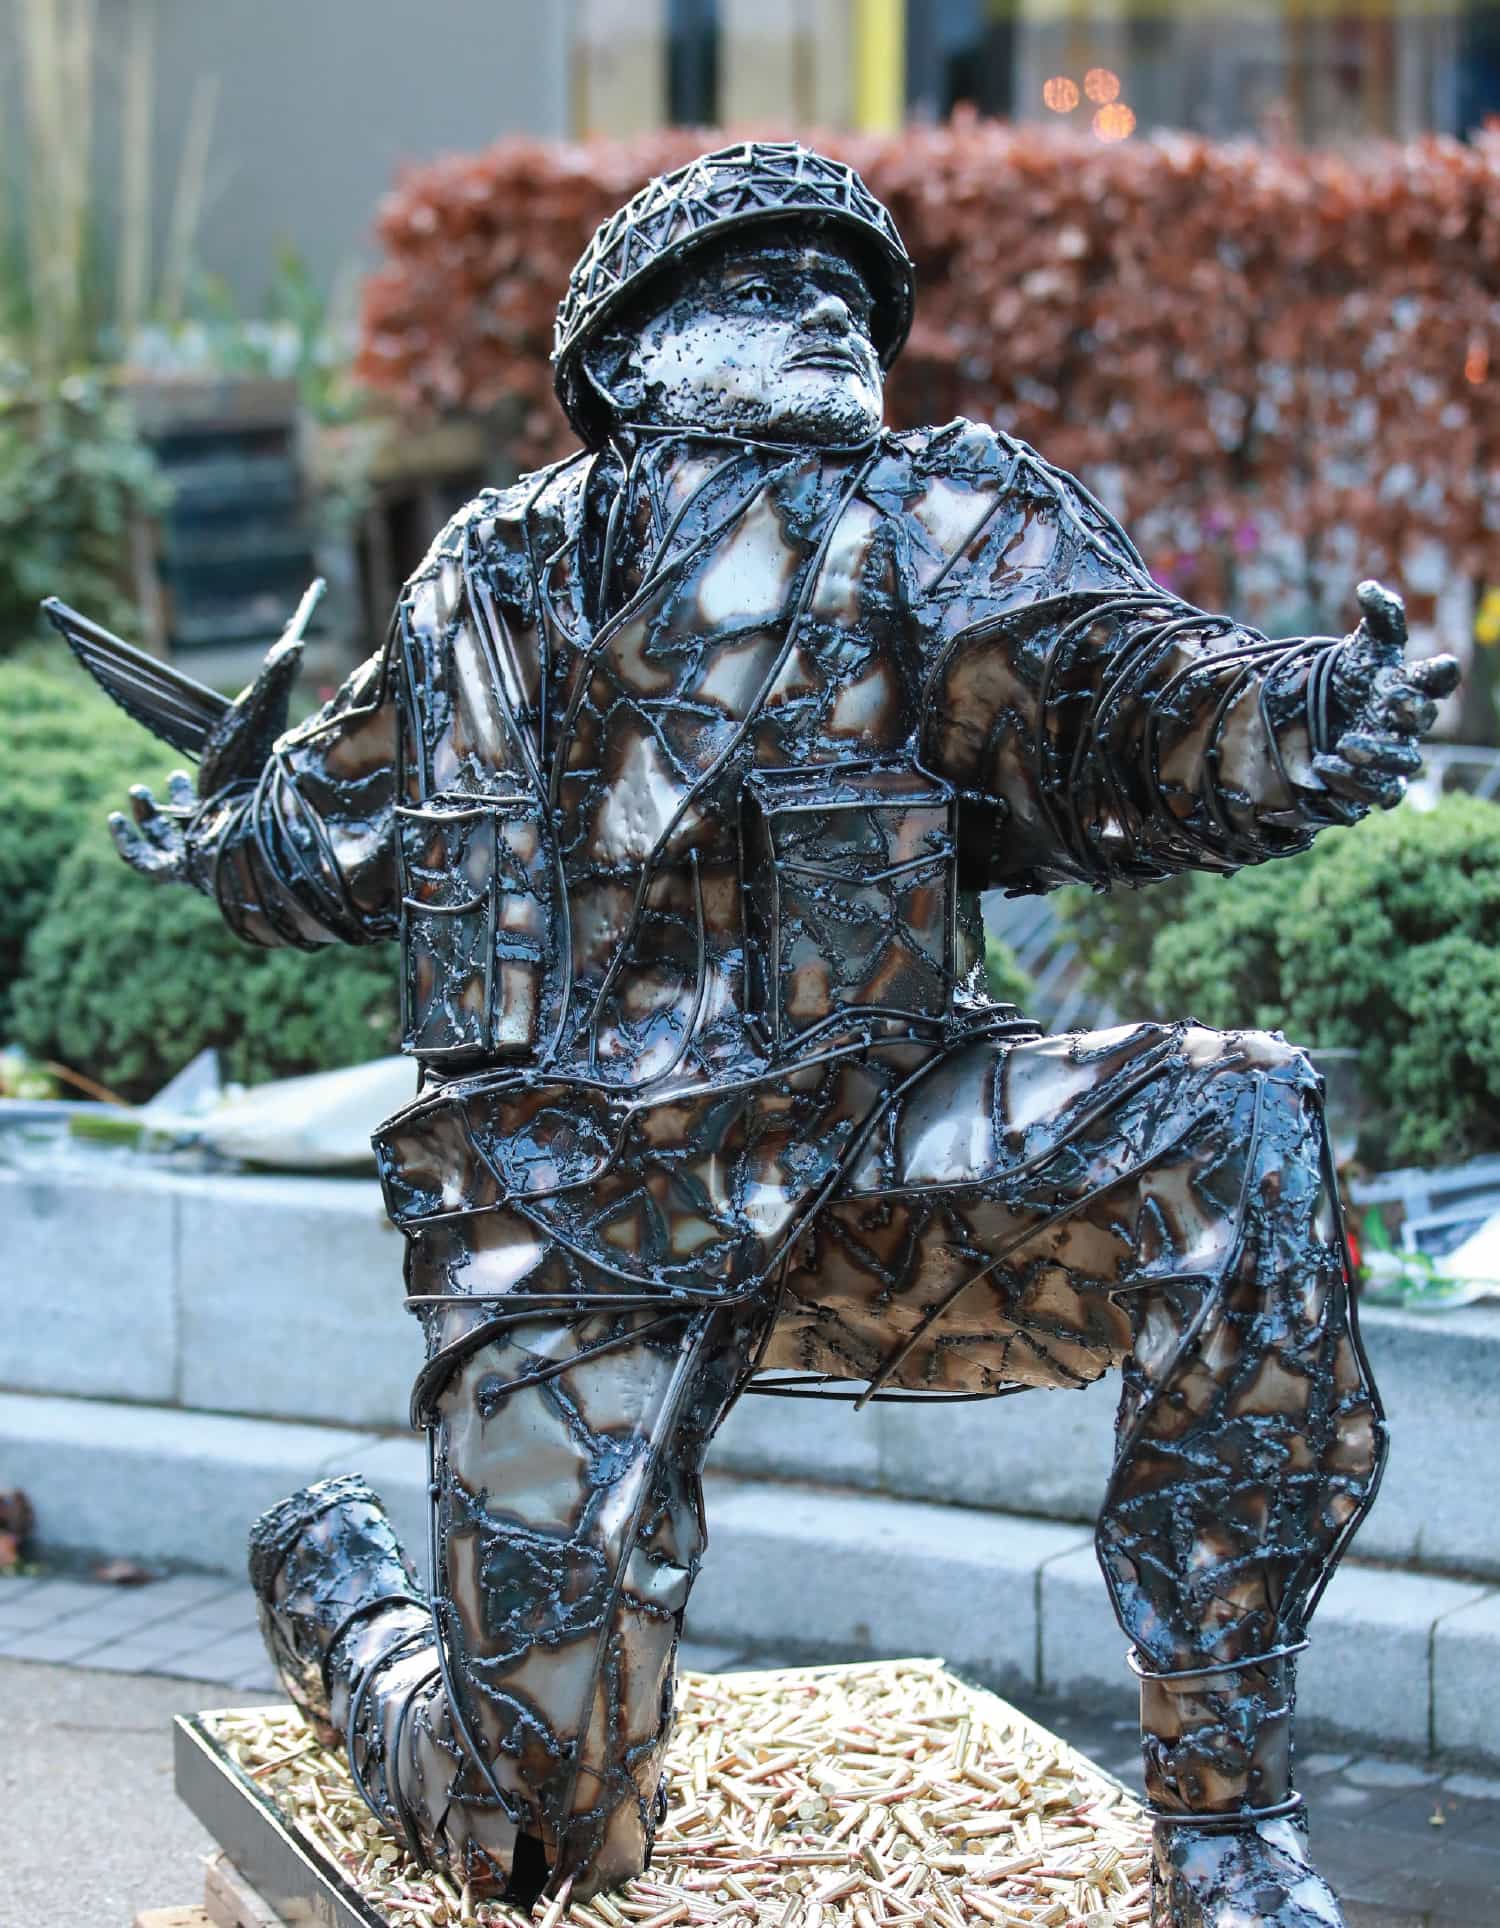 Image of a Soldier statue